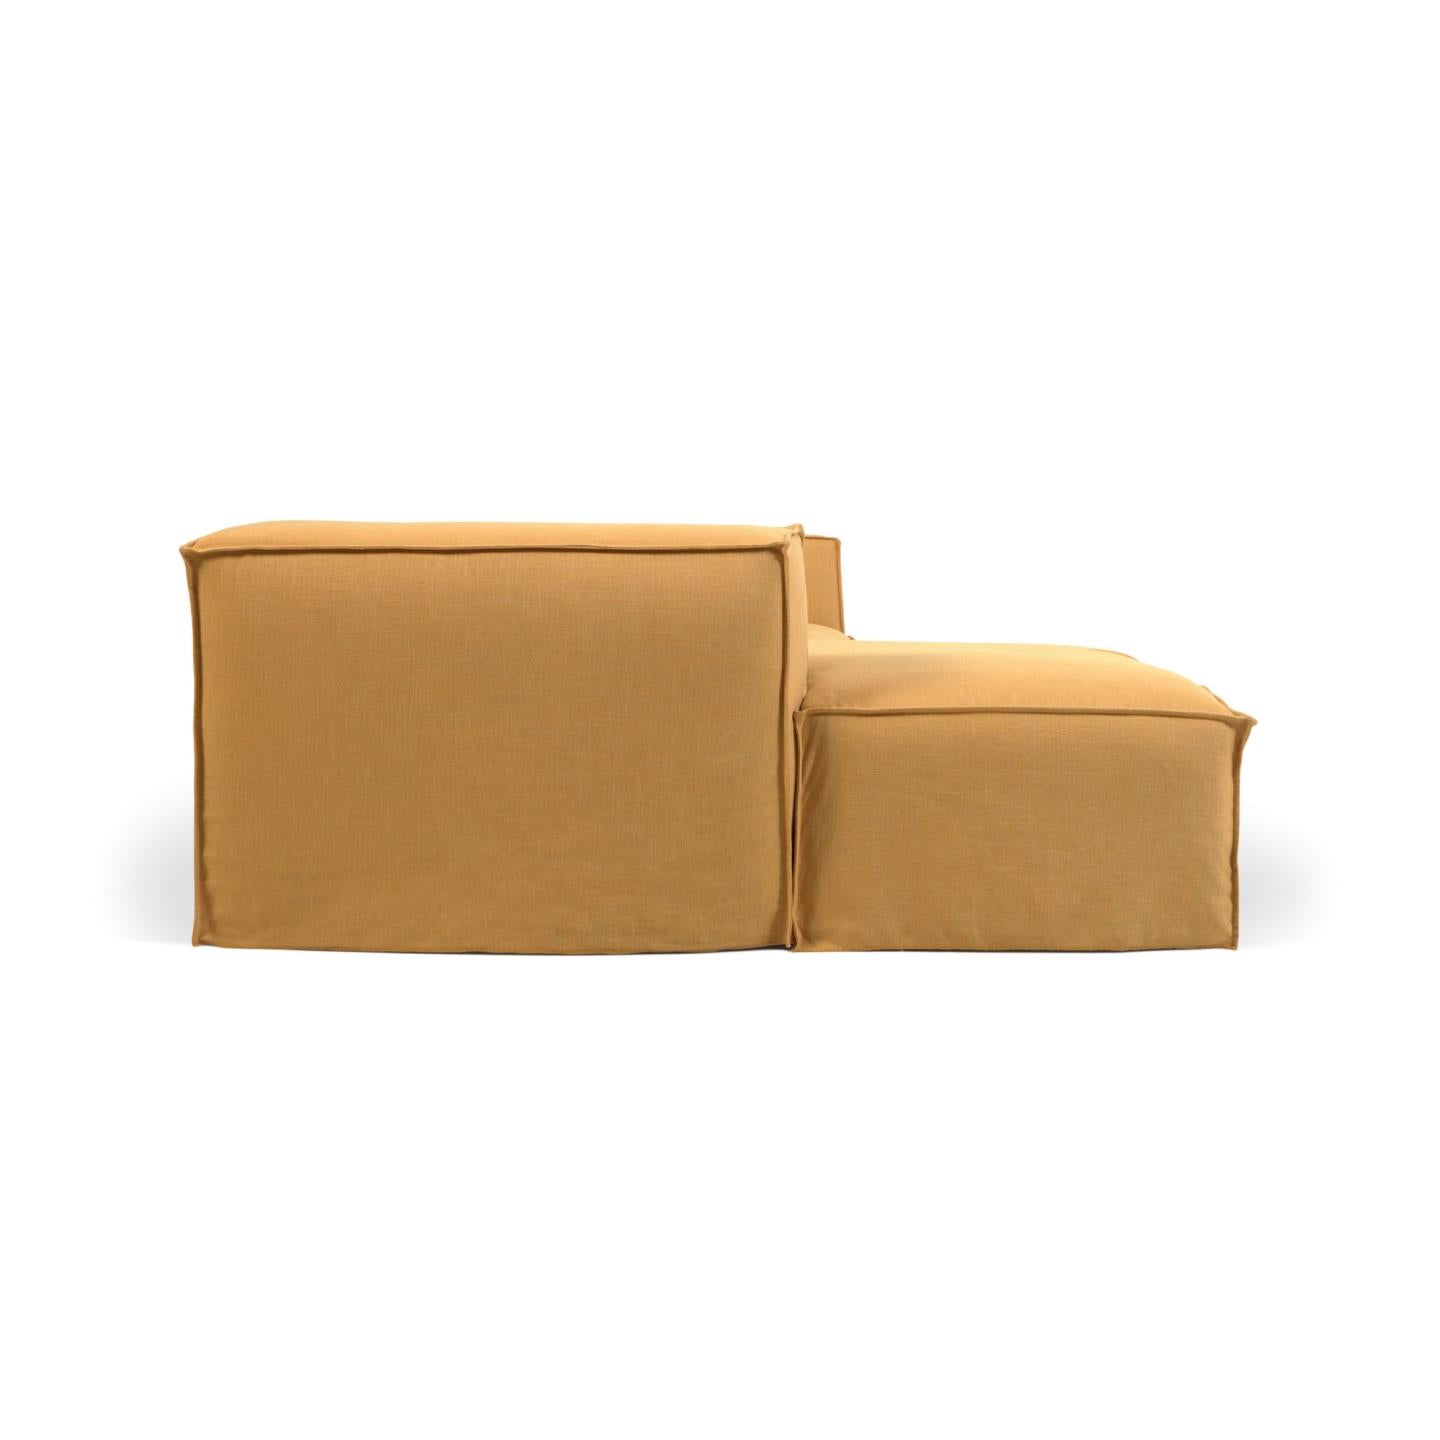 Blok 2 seater sofa w/ left-hand chaise longue and removable covers, mustard linen, 240 cm